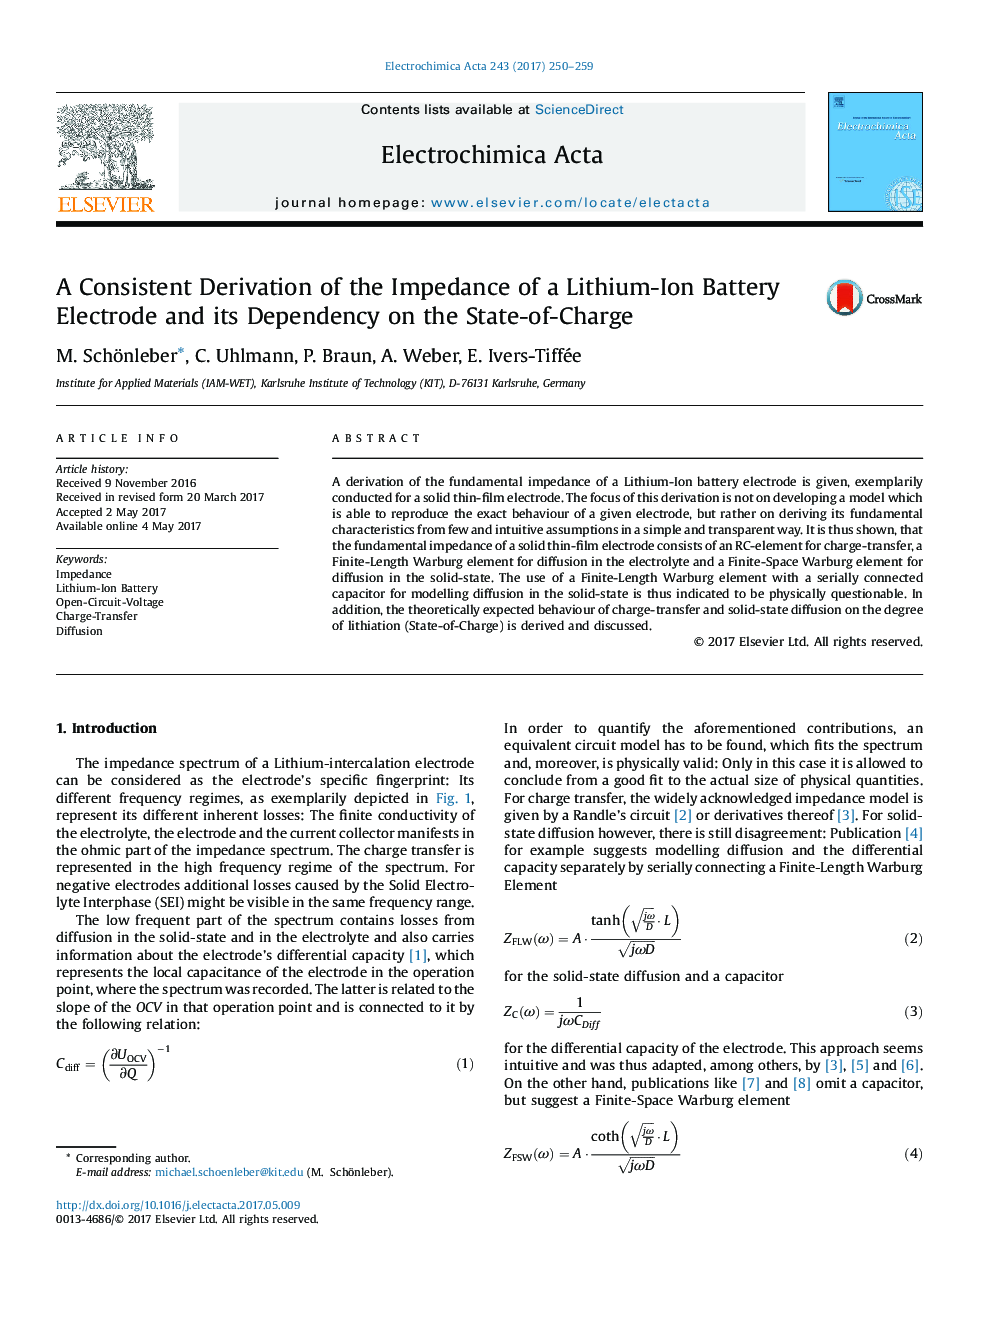 A Consistent Derivation of the Impedance of a Lithium-Ion Battery Electrode and its Dependency on the State-of-Charge